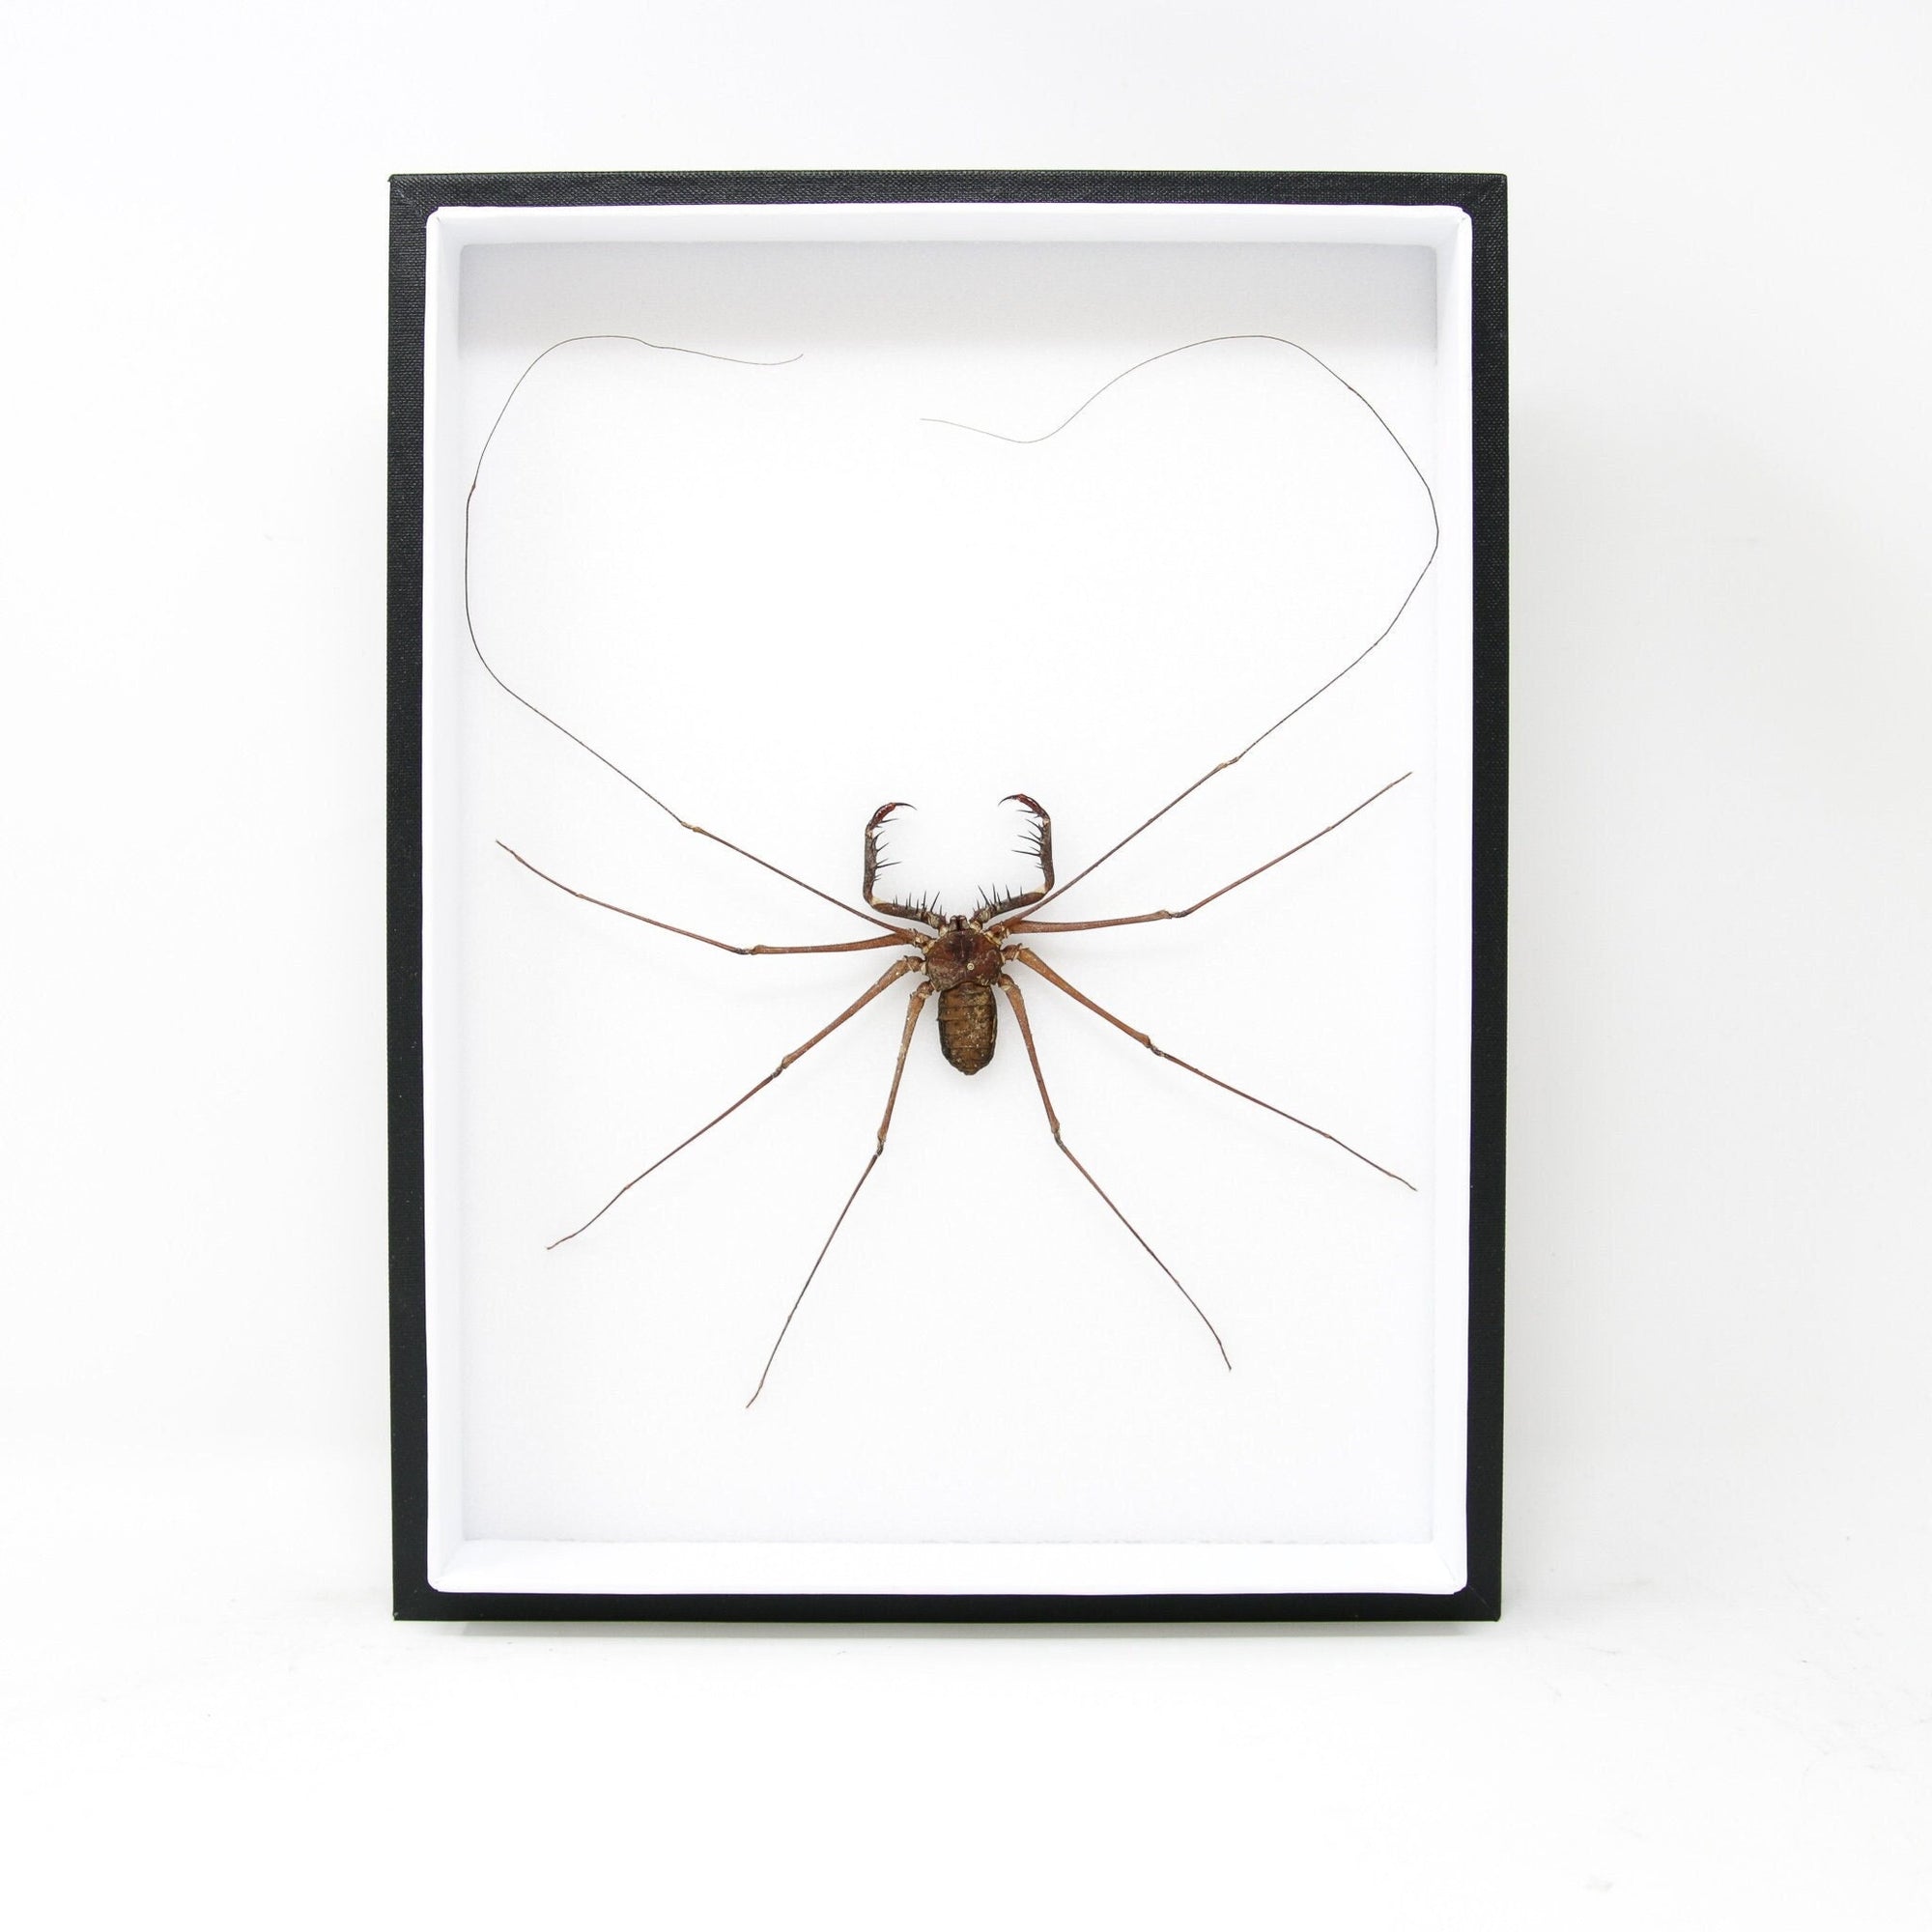 Very Fine Quality Pinned Insect Collection with Scientific Data | A1 Beetle Specimens in a Museum Entomology Box Frame | 12x9x2 inch (SKU19)